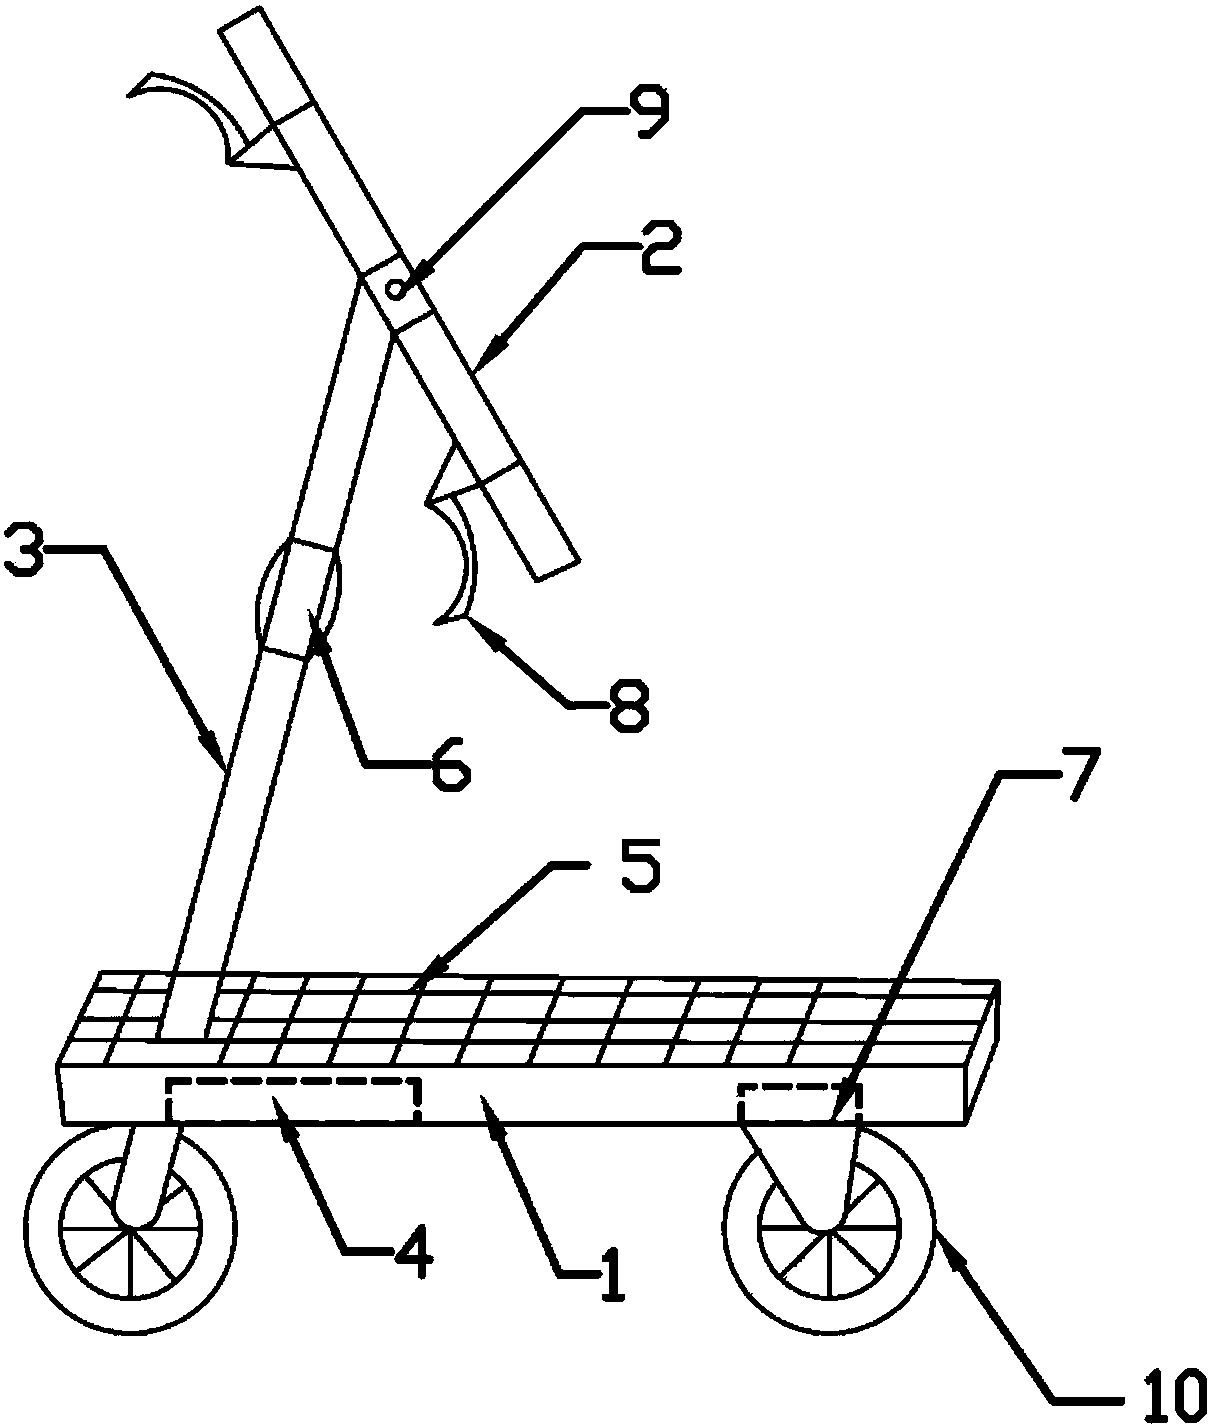 Scooter with dual functions of solar power generation and friction power generation